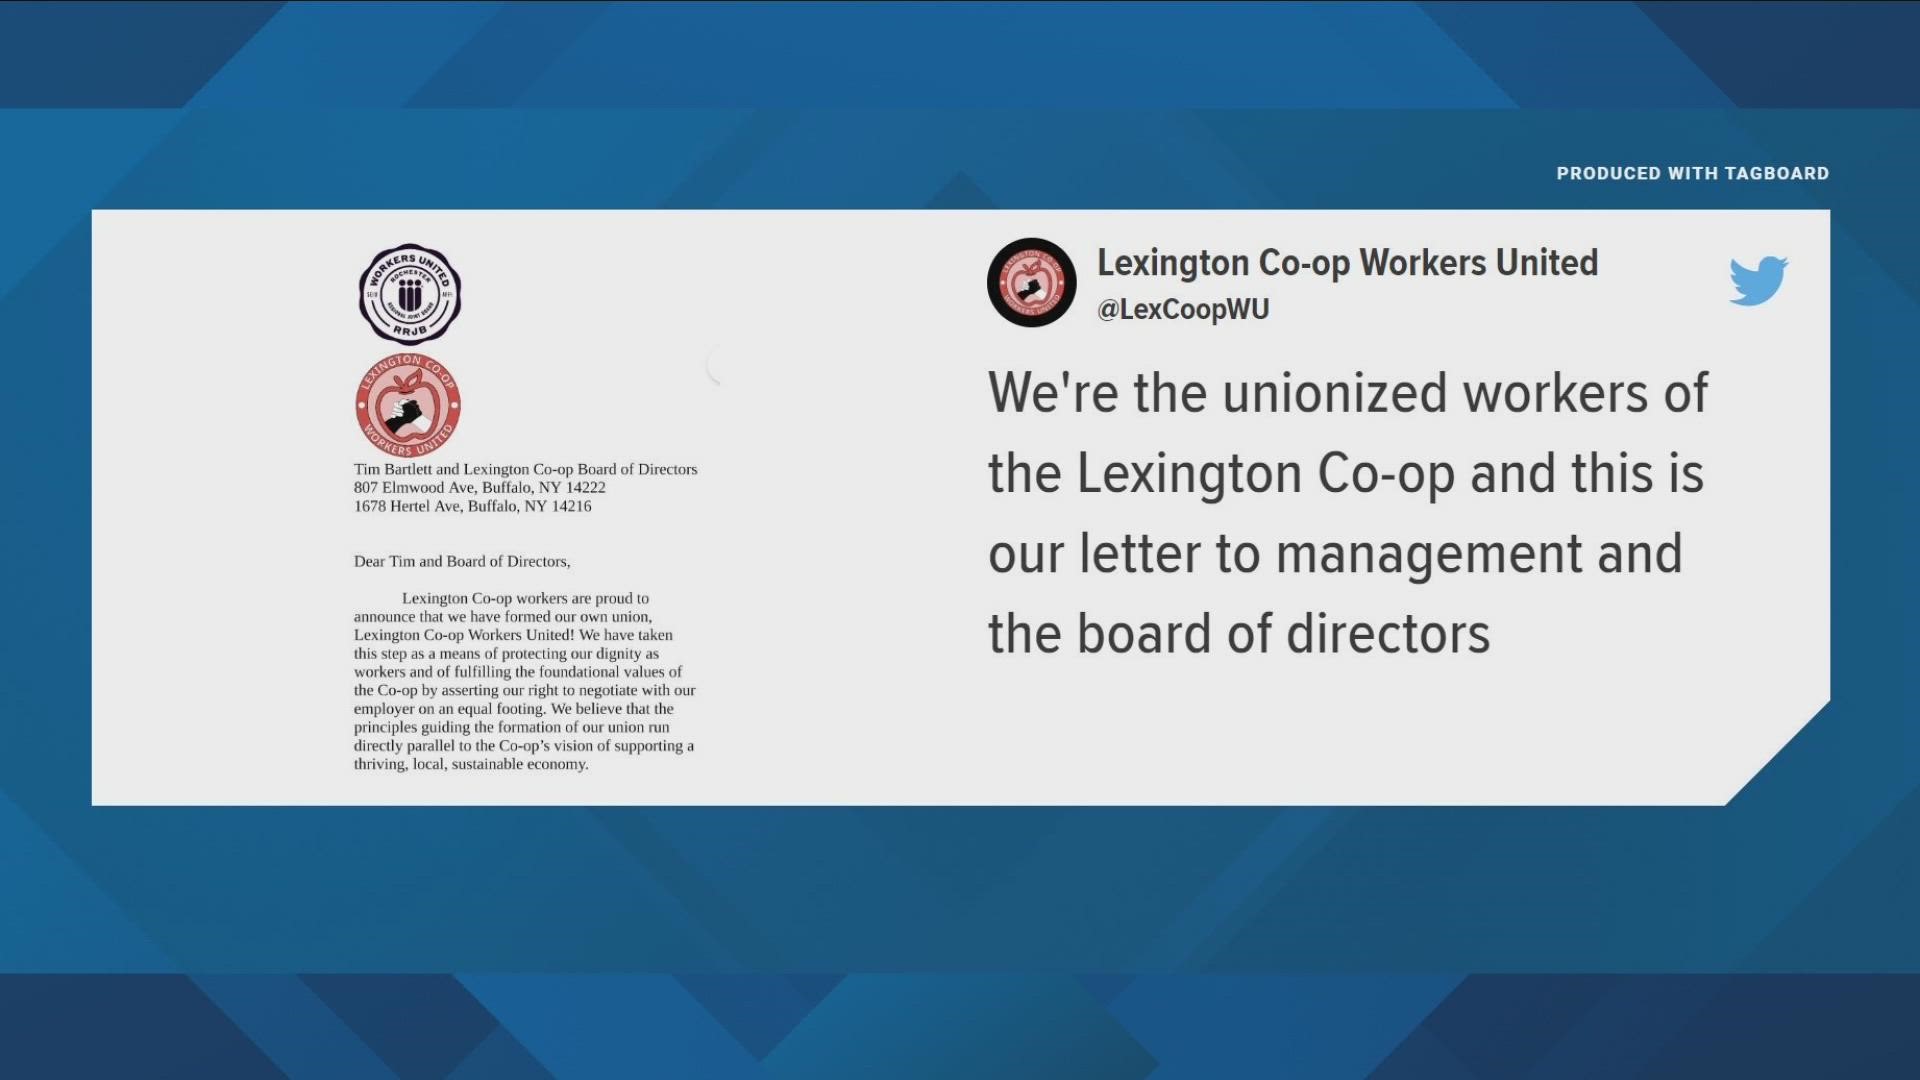 Workers at the Lexington Co-op move to unionize